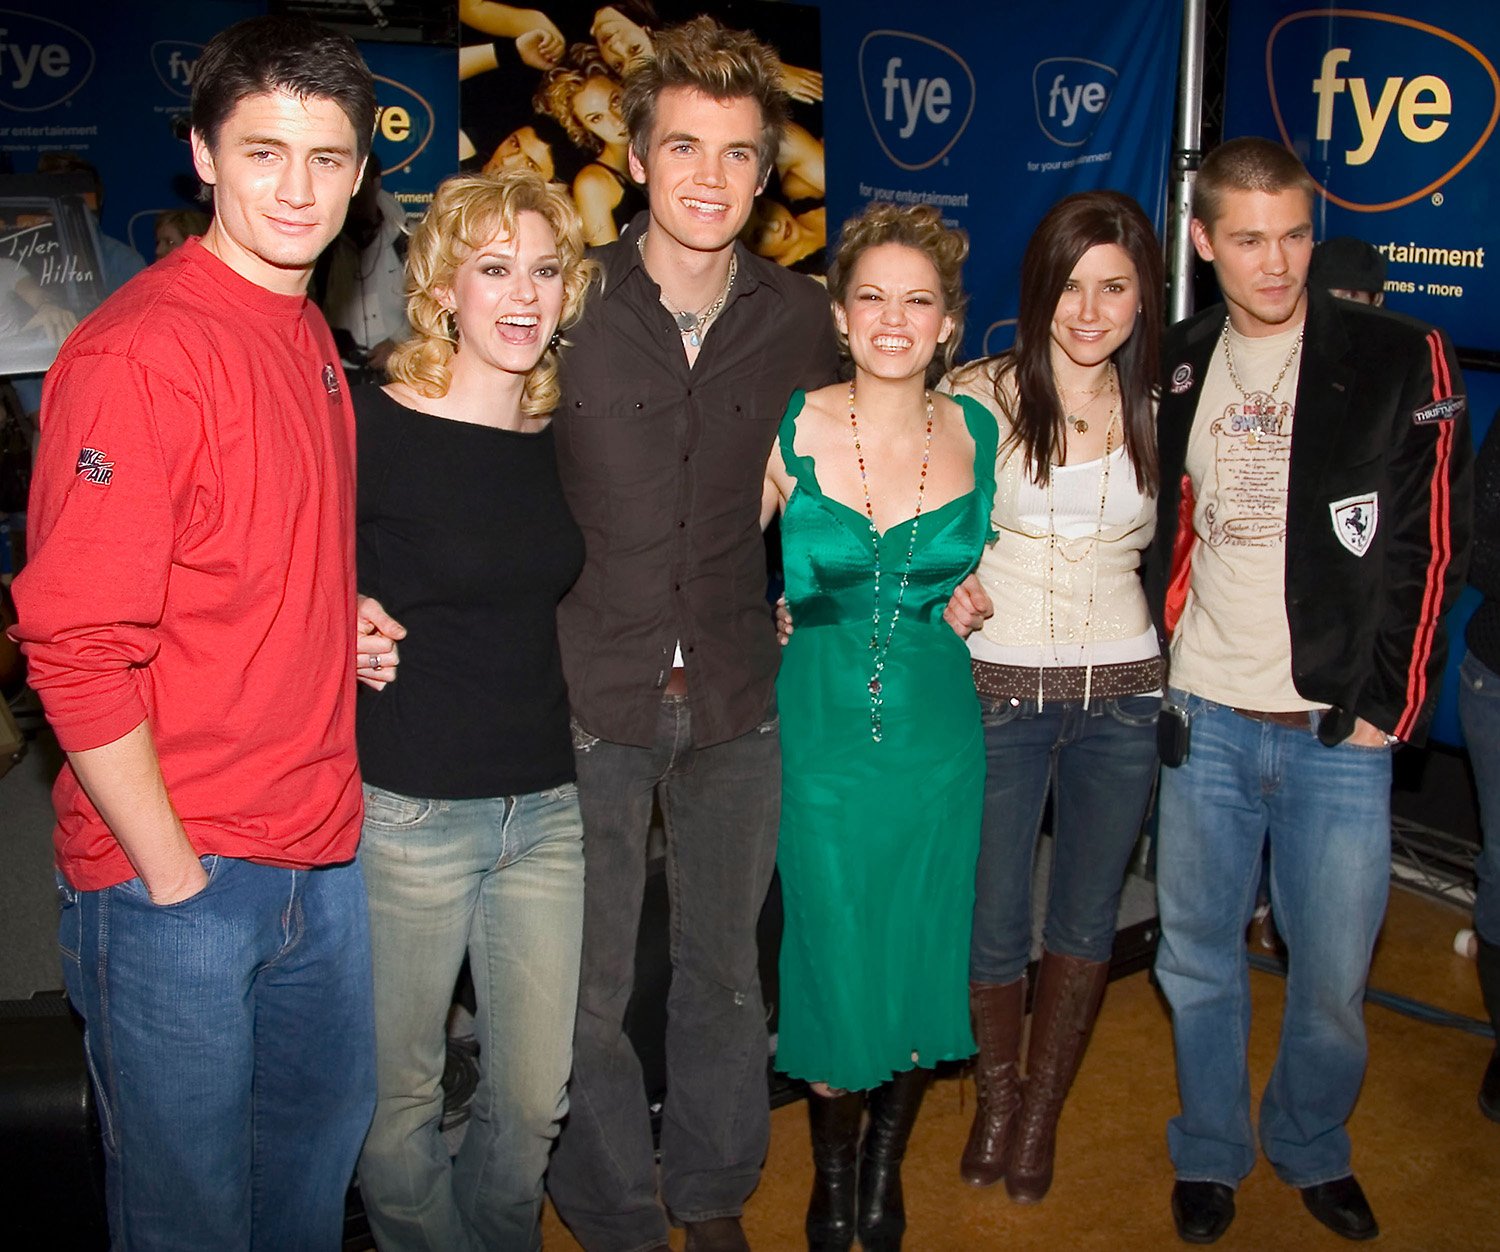 One Tree Hill cast members James Lafferty, Hilarie Burton Morgan, Tyler Hilton, Bethany Joy Lenz, Sophia Bush, and Chad Michael Murray, who have all discussed a reboot.